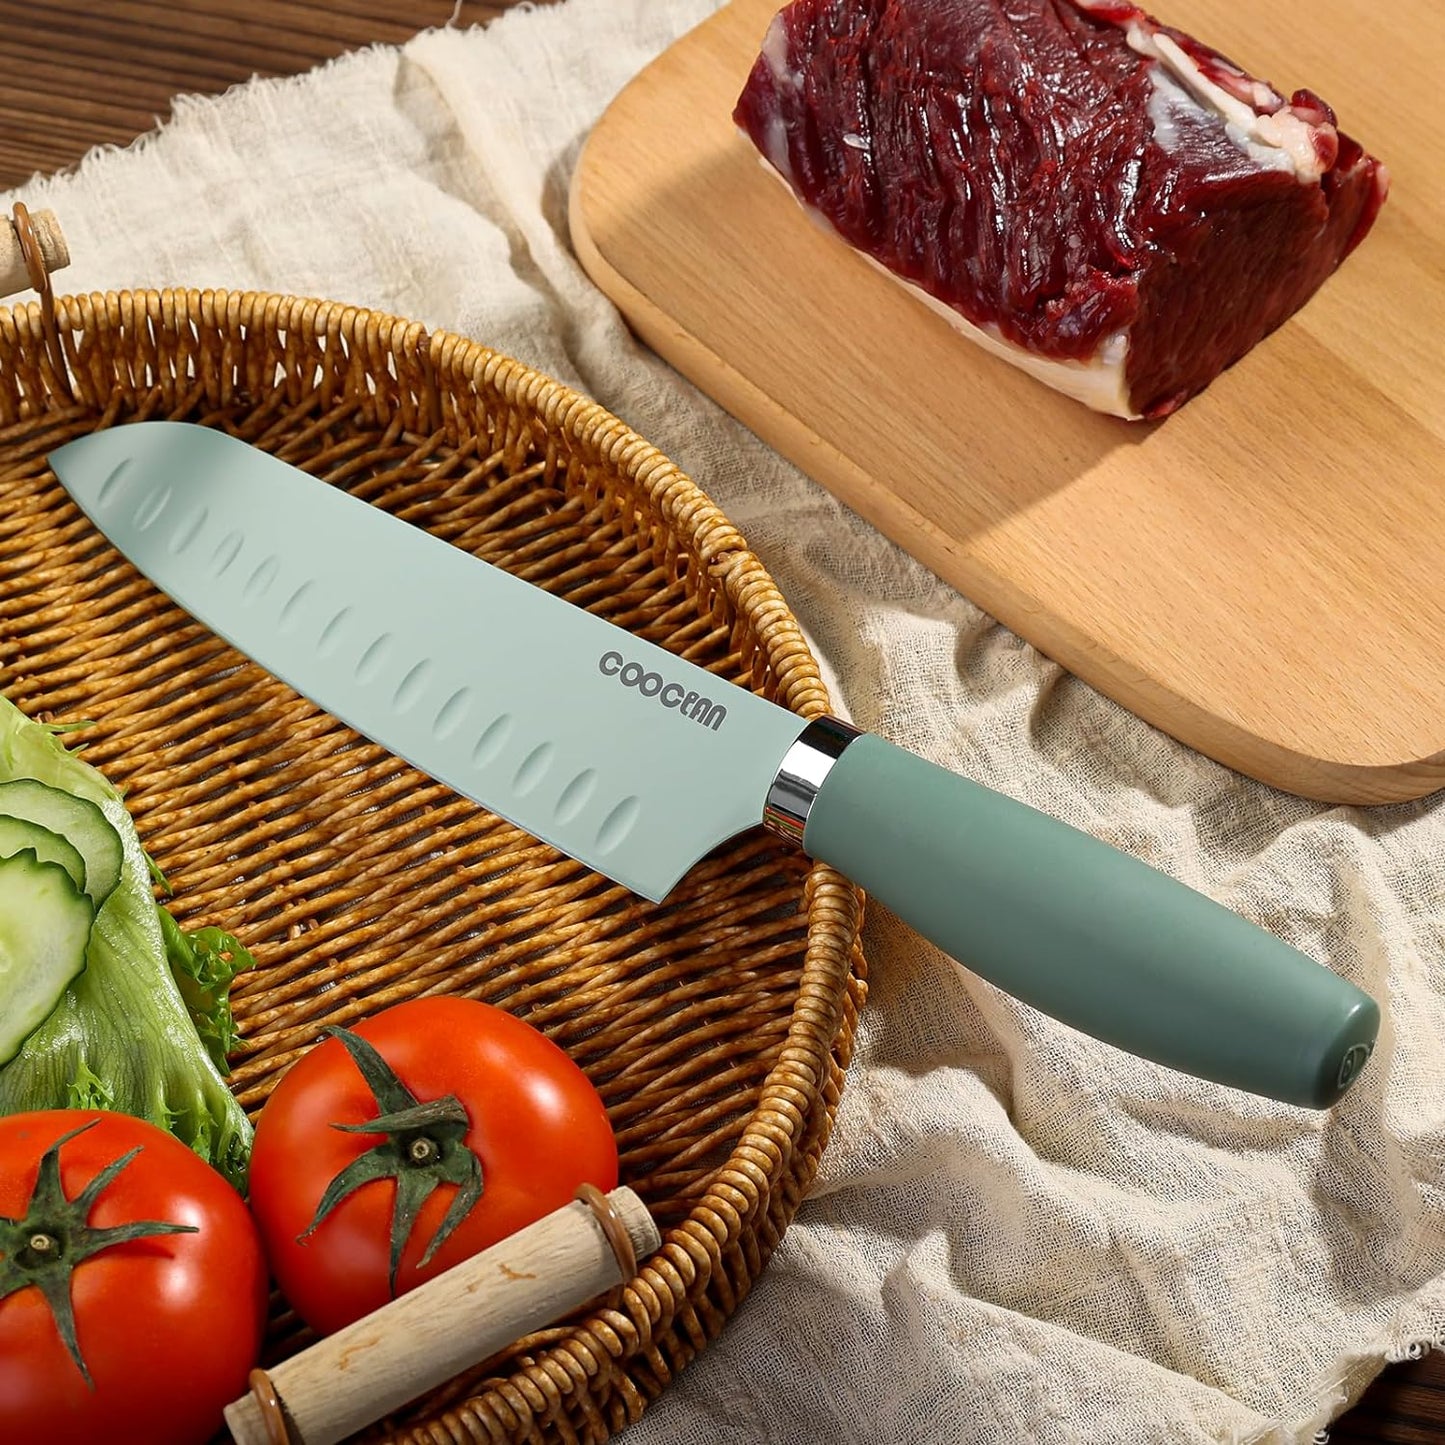 KD Santoku Chef Knife Stainless Steel with Gift Box & Sheath